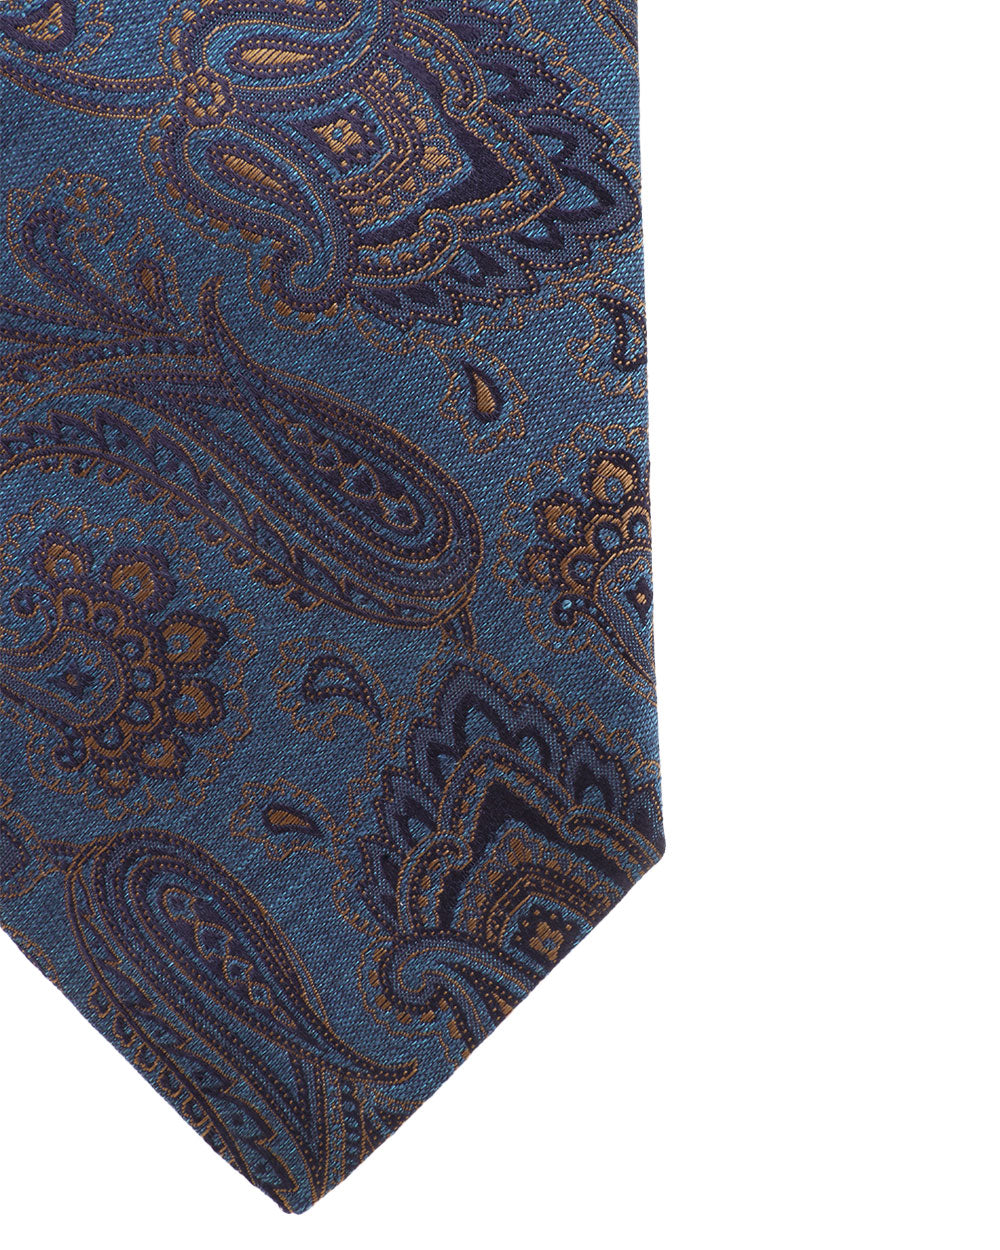 Navy and Brown Paisley Silk and Wool Tie